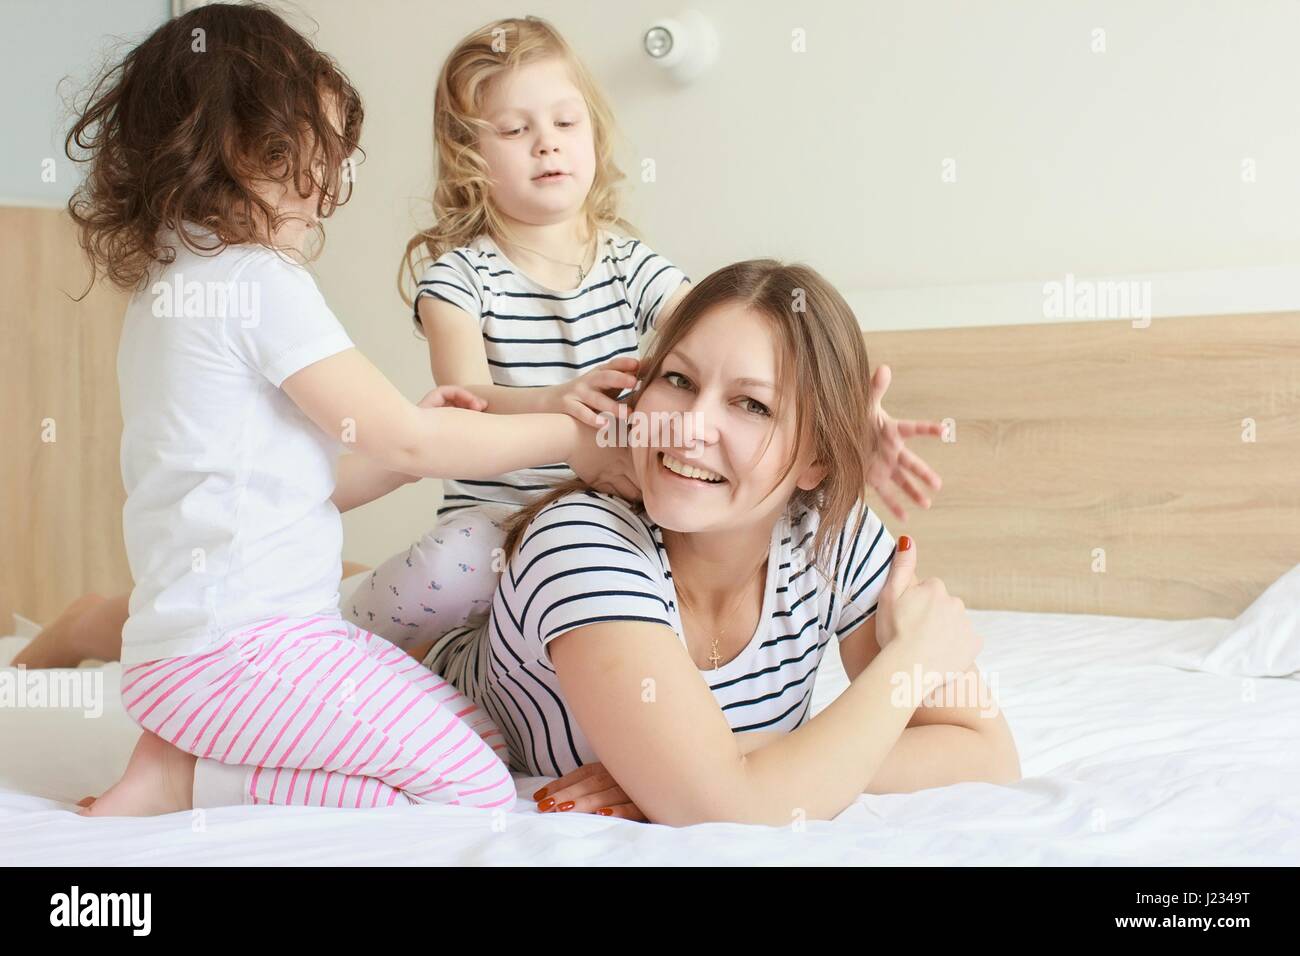 Happy loving family. Mother and her daughter child girl playing and hugging. Stock Photo